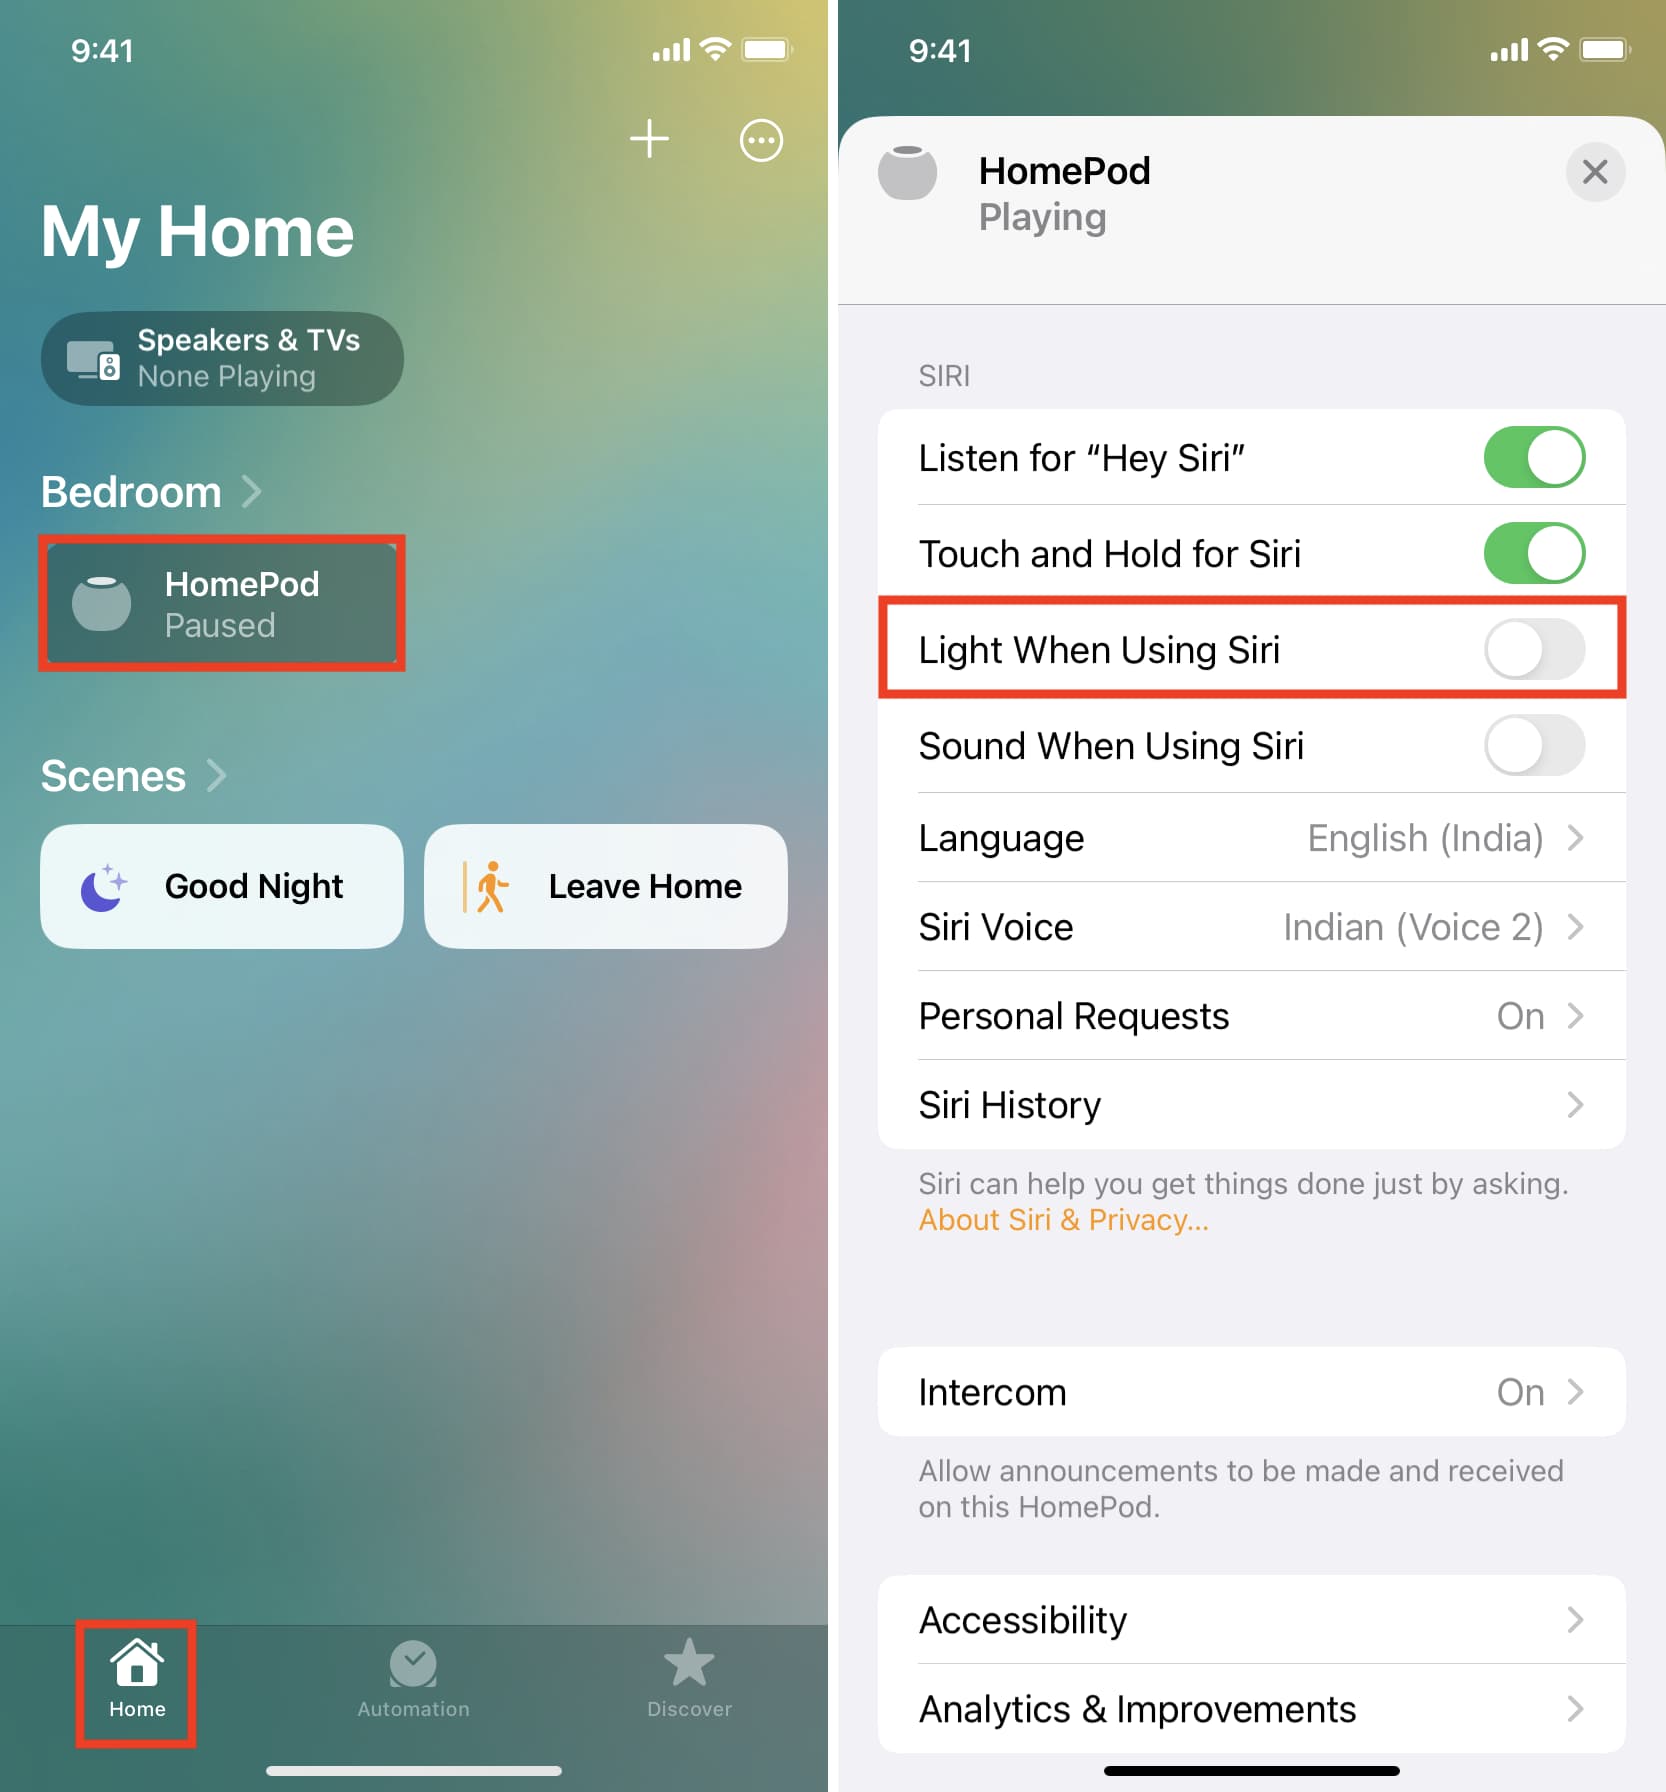 Switch off "Light When Using Siri" from HomePod settings inside the Home app